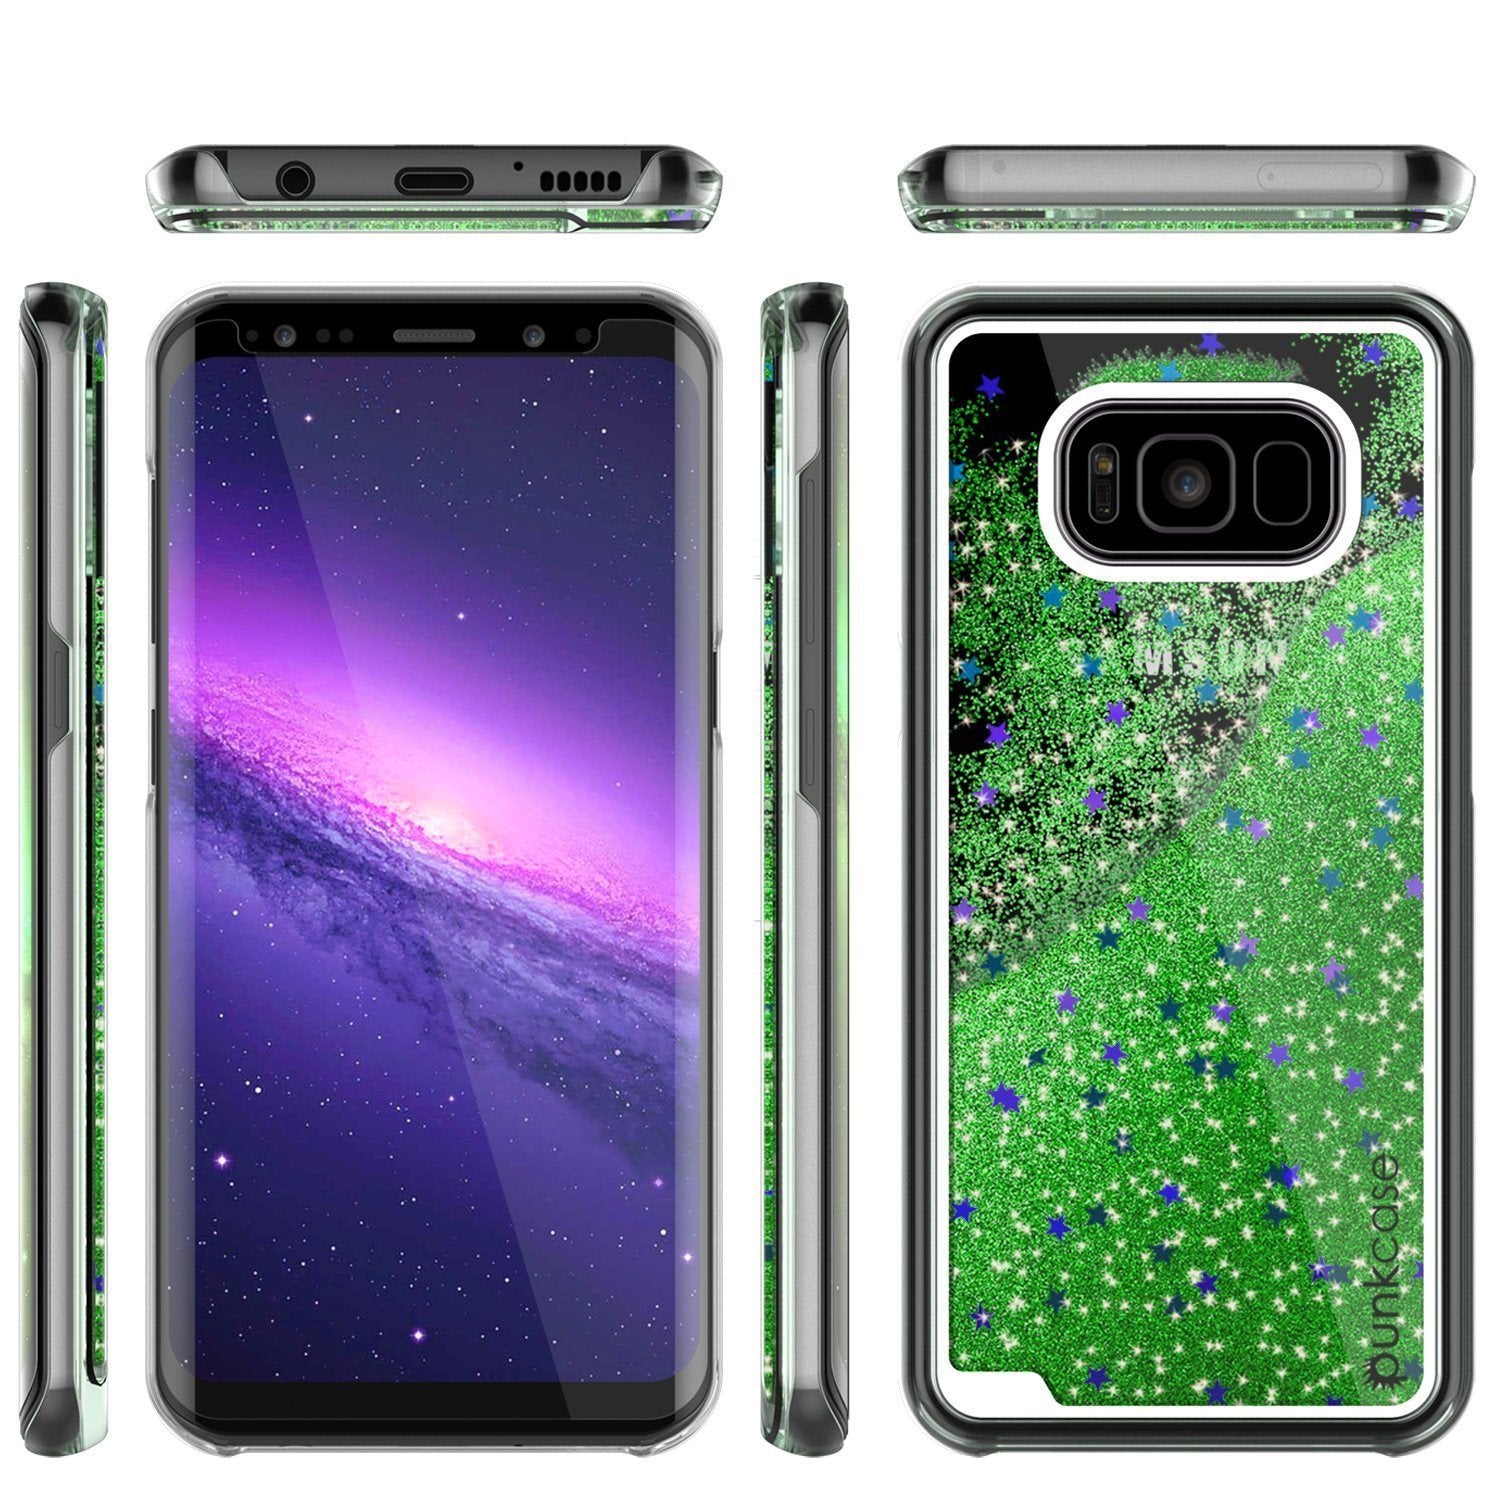 S8 Plus Case, Punkcase [Liquid Series] Protective Dual Layer Floating Glitter Cover with lots of Bling & Sparkle + PunkShield Screen Protector for Samsungs Galaxy S8+ [Green] - PunkCase NZ